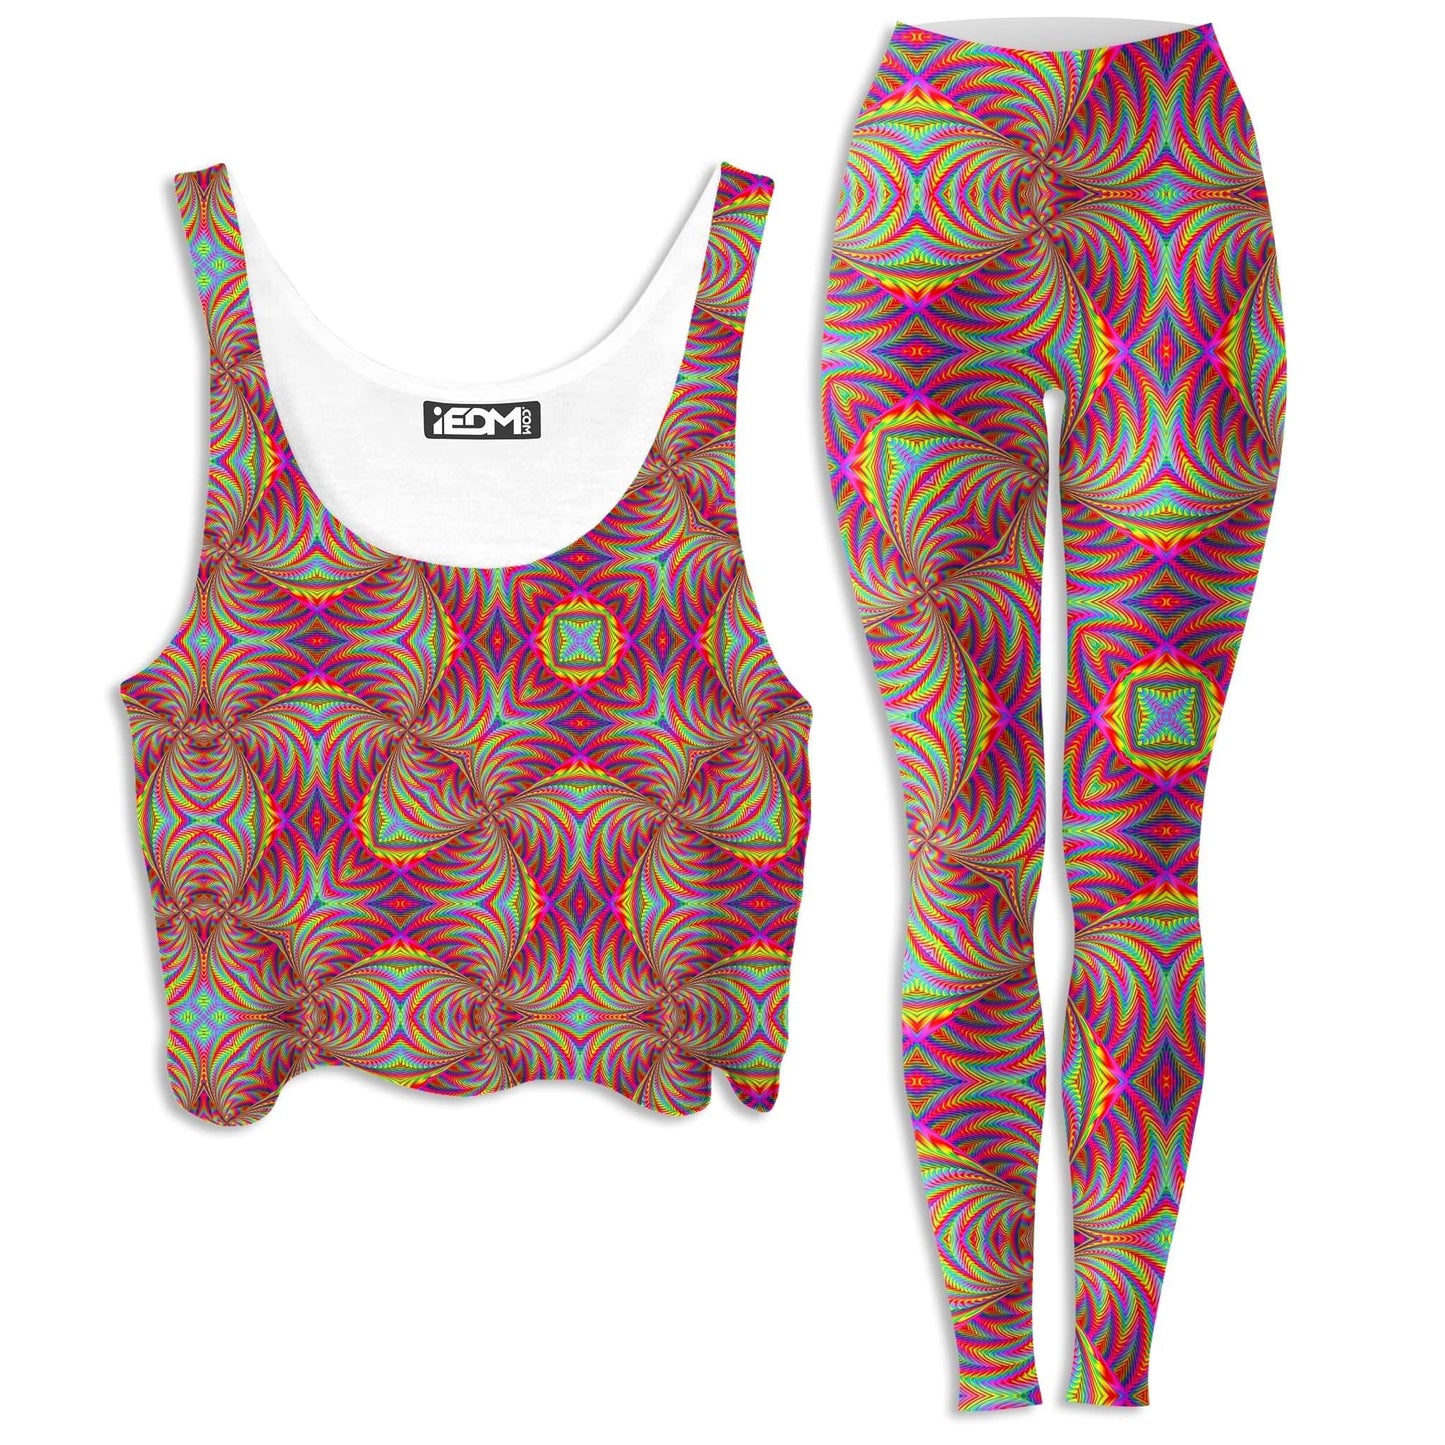 All The Faves Crop Top and Leggings Combo, Art Design Works, | iEDM